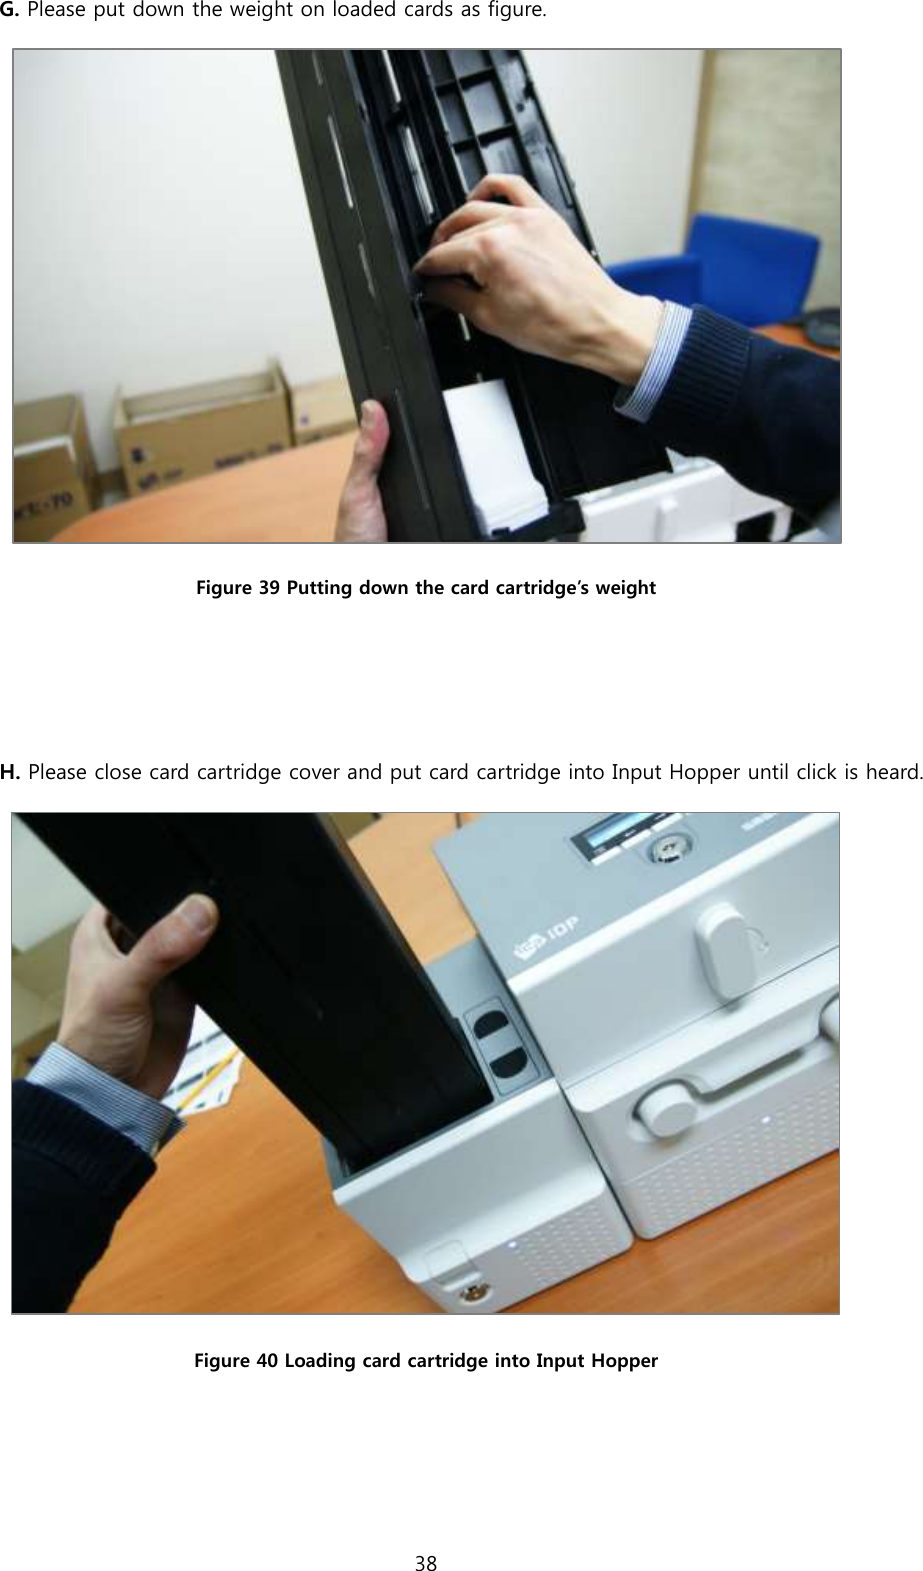 38  G. Please put down the weight on loaded cards as figure.   Figure 39 Putting down the card cartridge’s weight   H. Please close card cartridge cover and put card cartridge into Input Hopper until click is heard.  Figure 40 Loading card cartridge into Input Hopper   